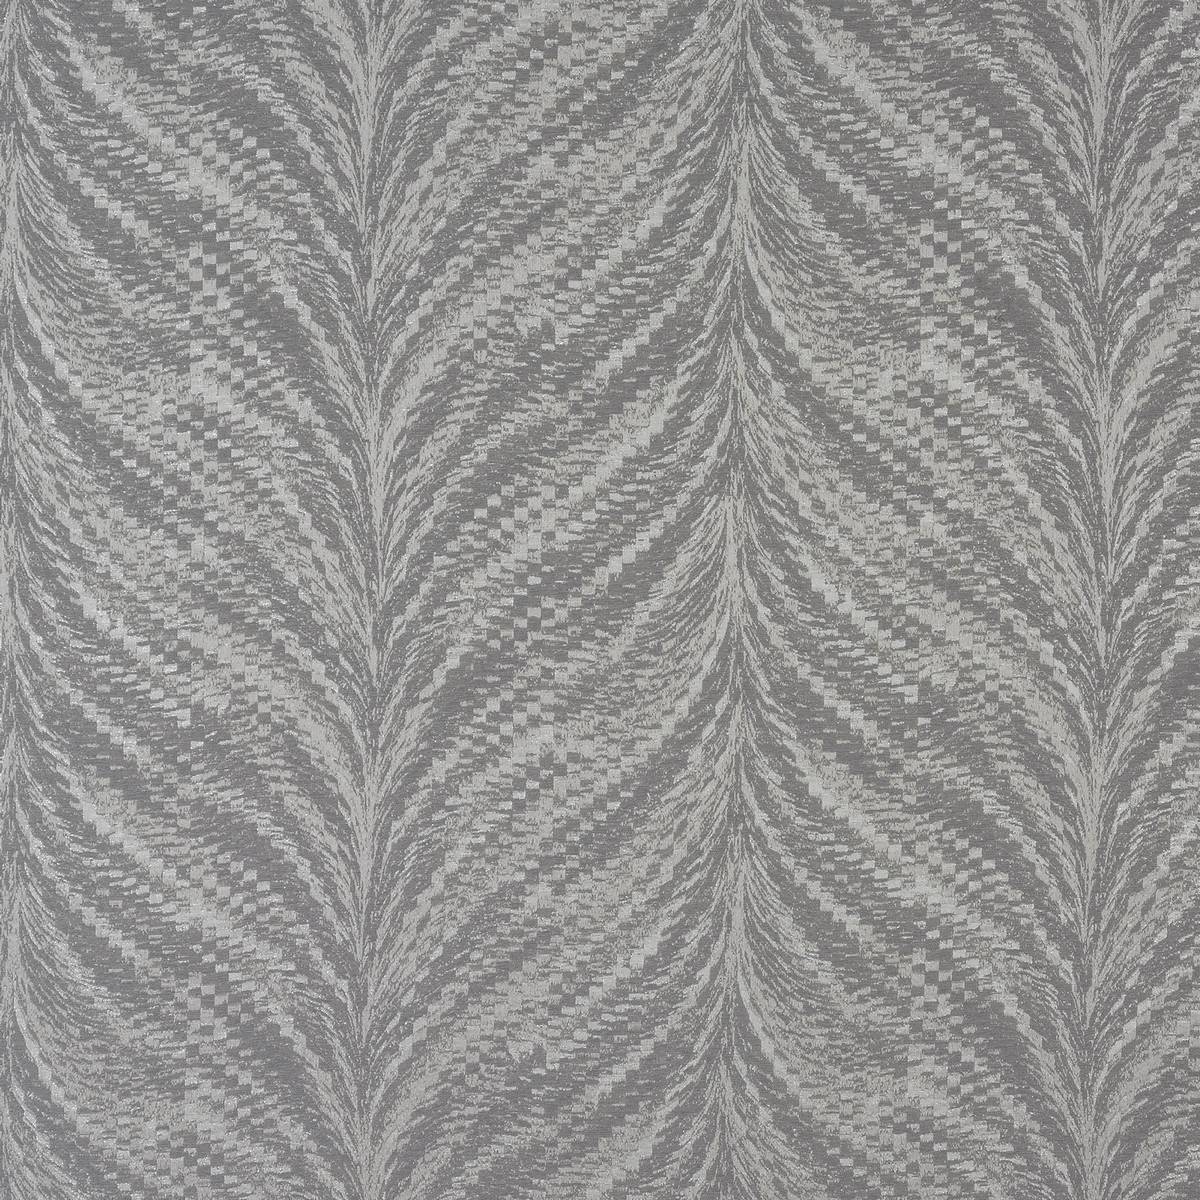 Luxor Silver Fabric by Porter & Stone